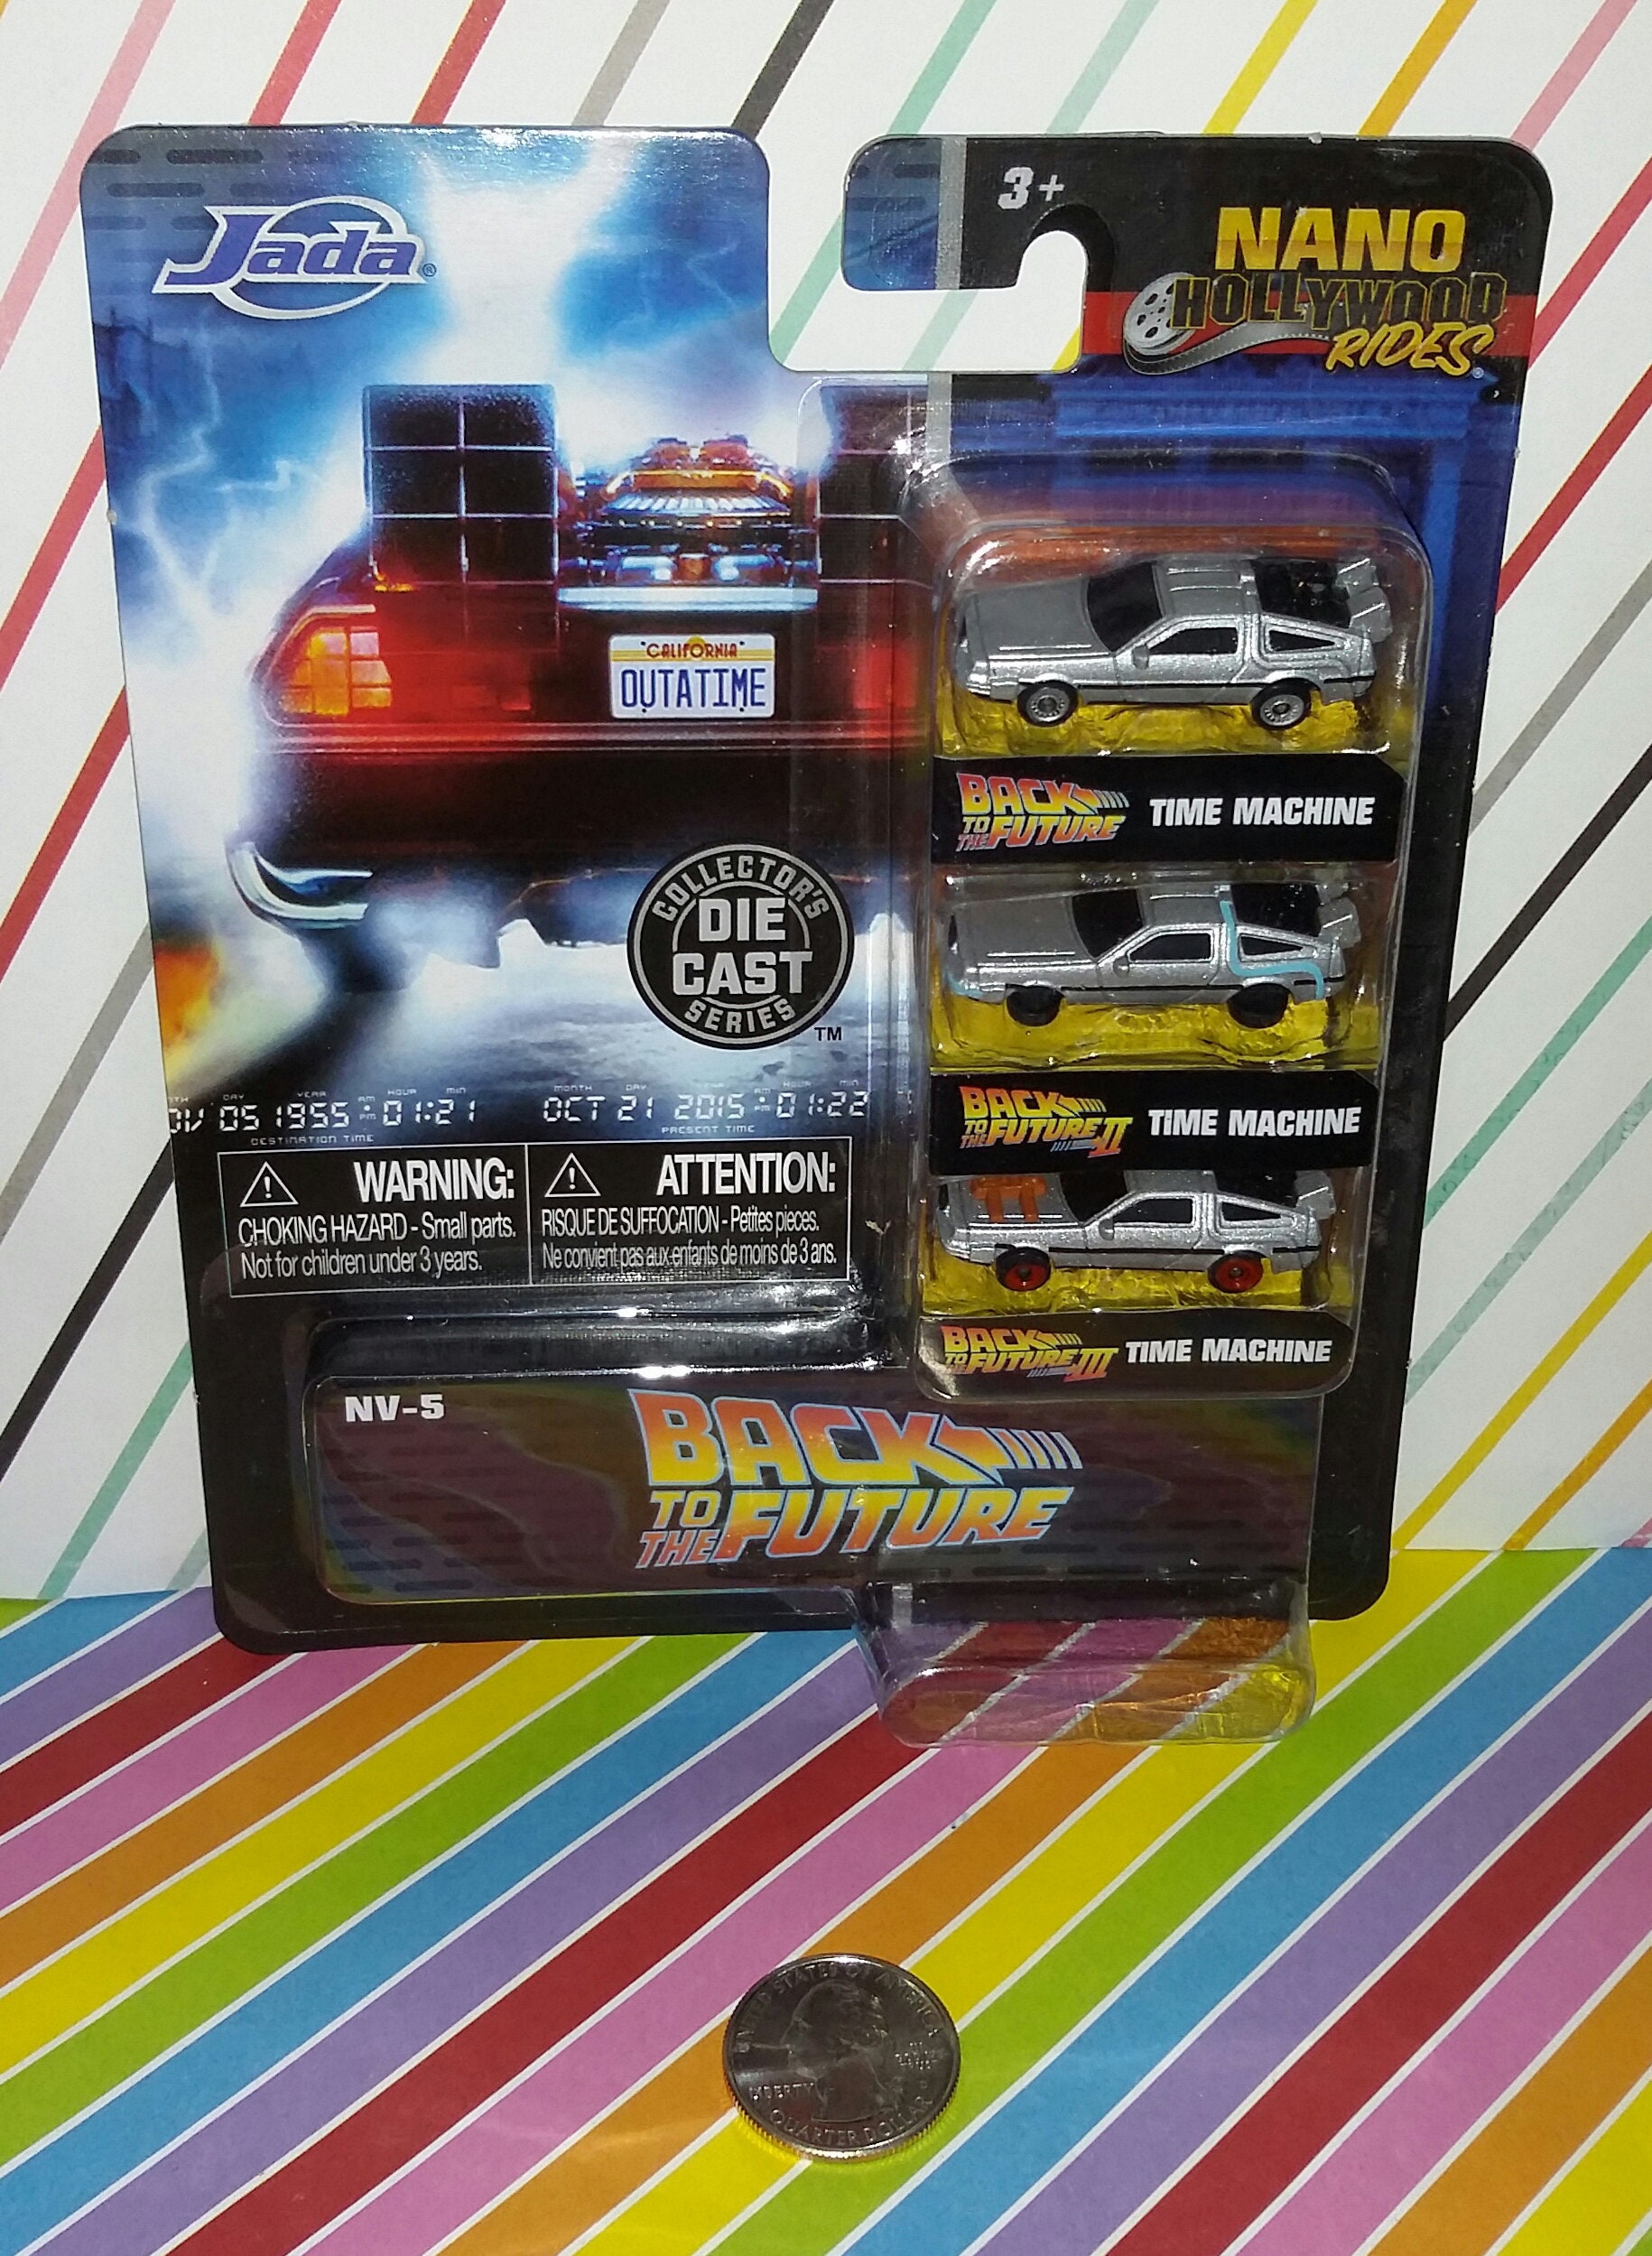 BACK TO THE FUTURE DELOREAN OUTATIME Official Tyvek Gadget Case